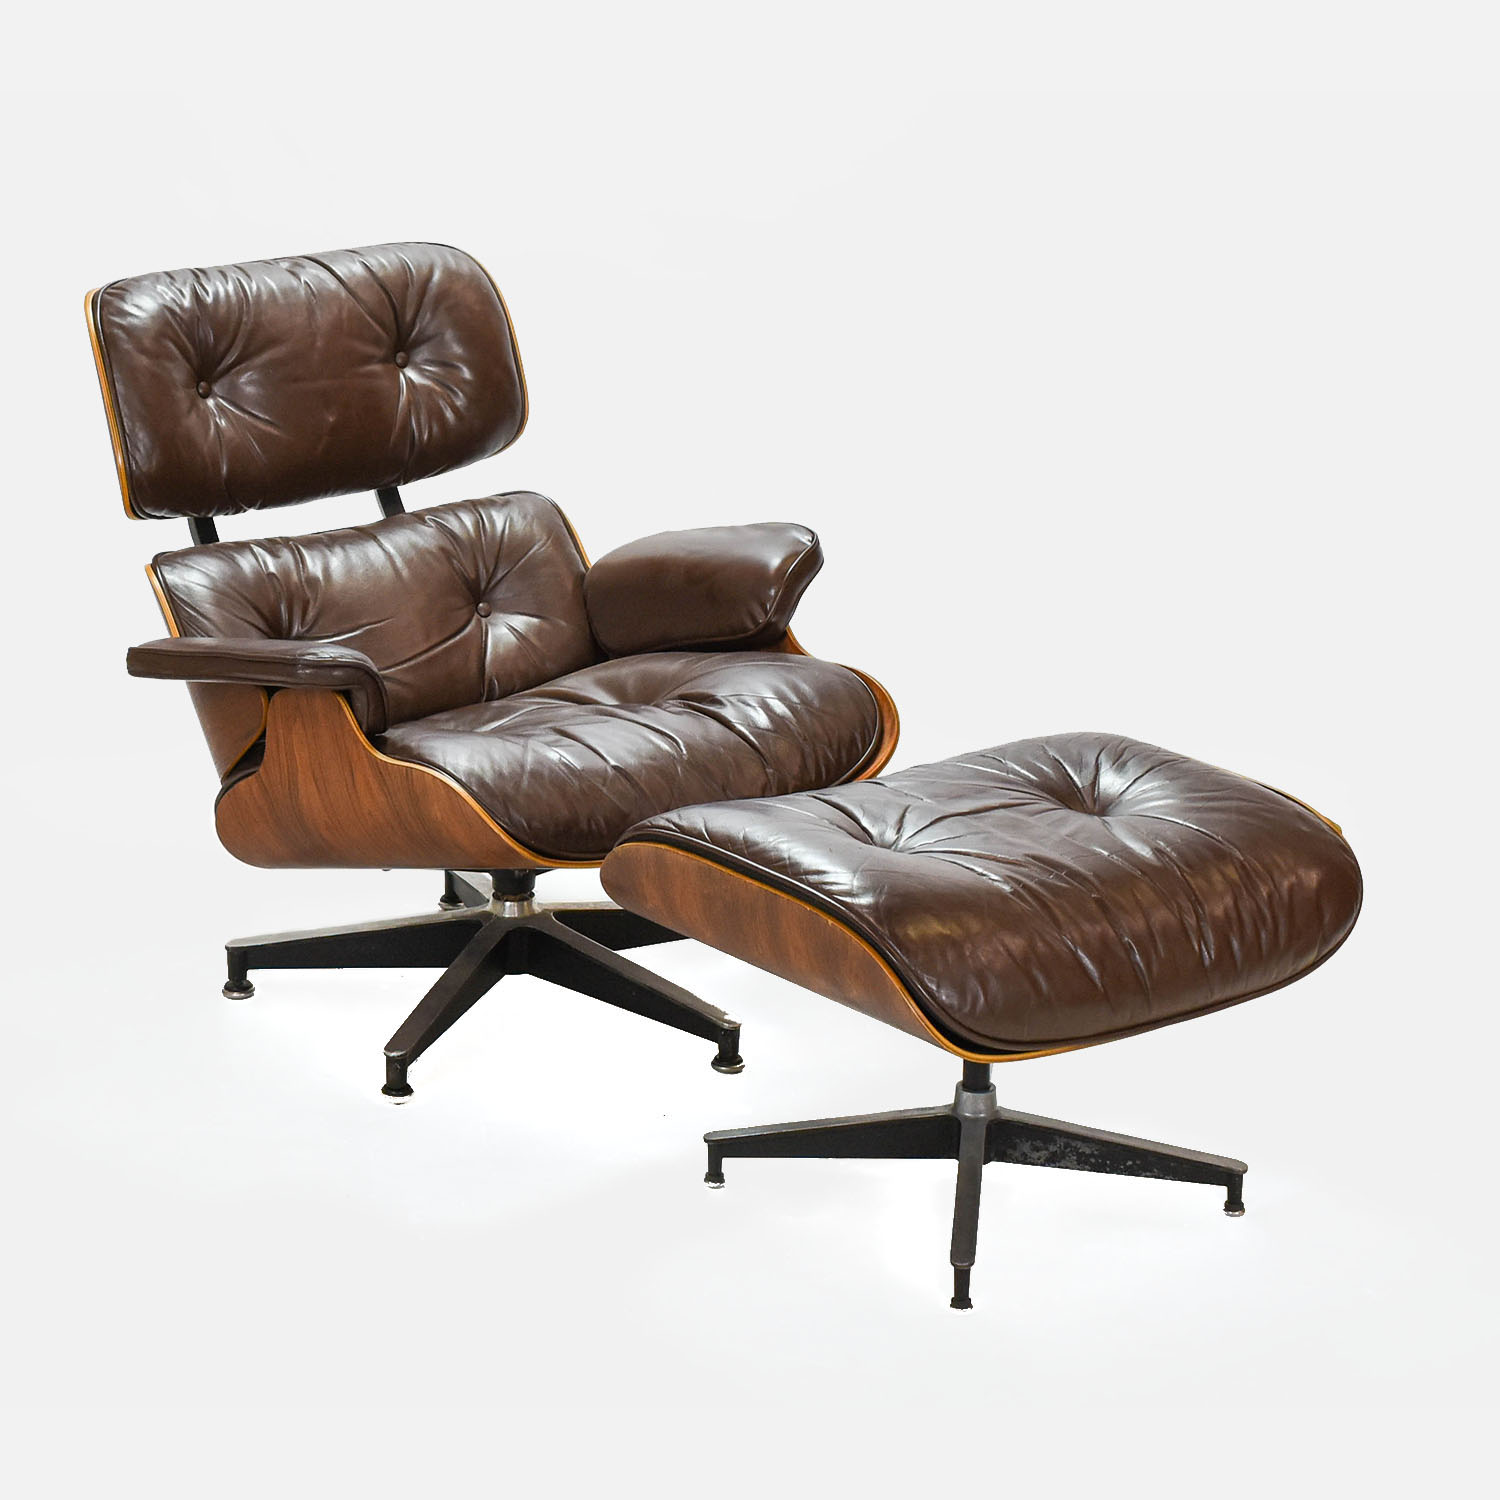 Eames Herman Miller Rosewood Lounge Chair/Ottoman